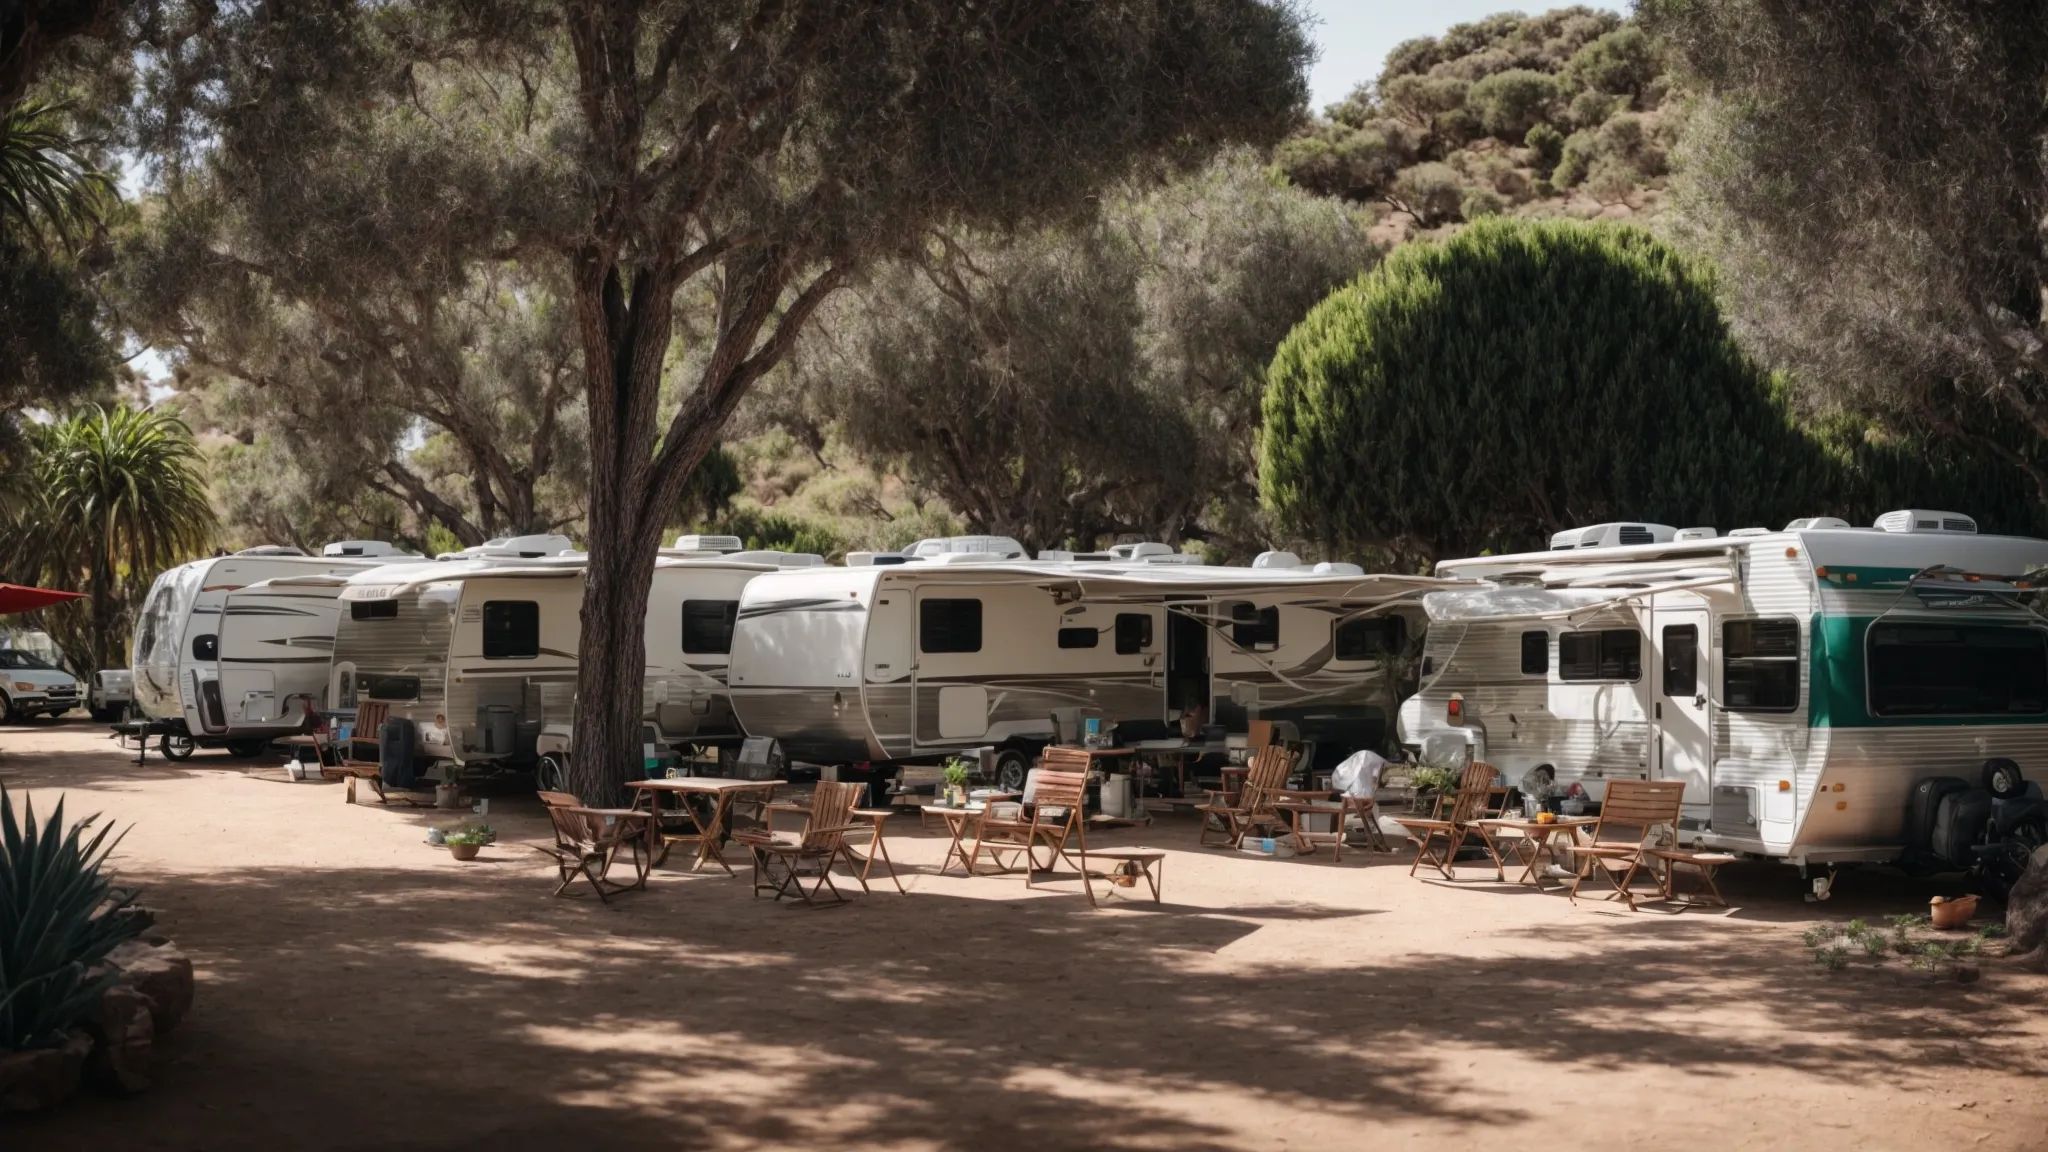 rvs parked amidst lush greenery in a spacious san diego park, with people relaxing in camping chairs under awnings.